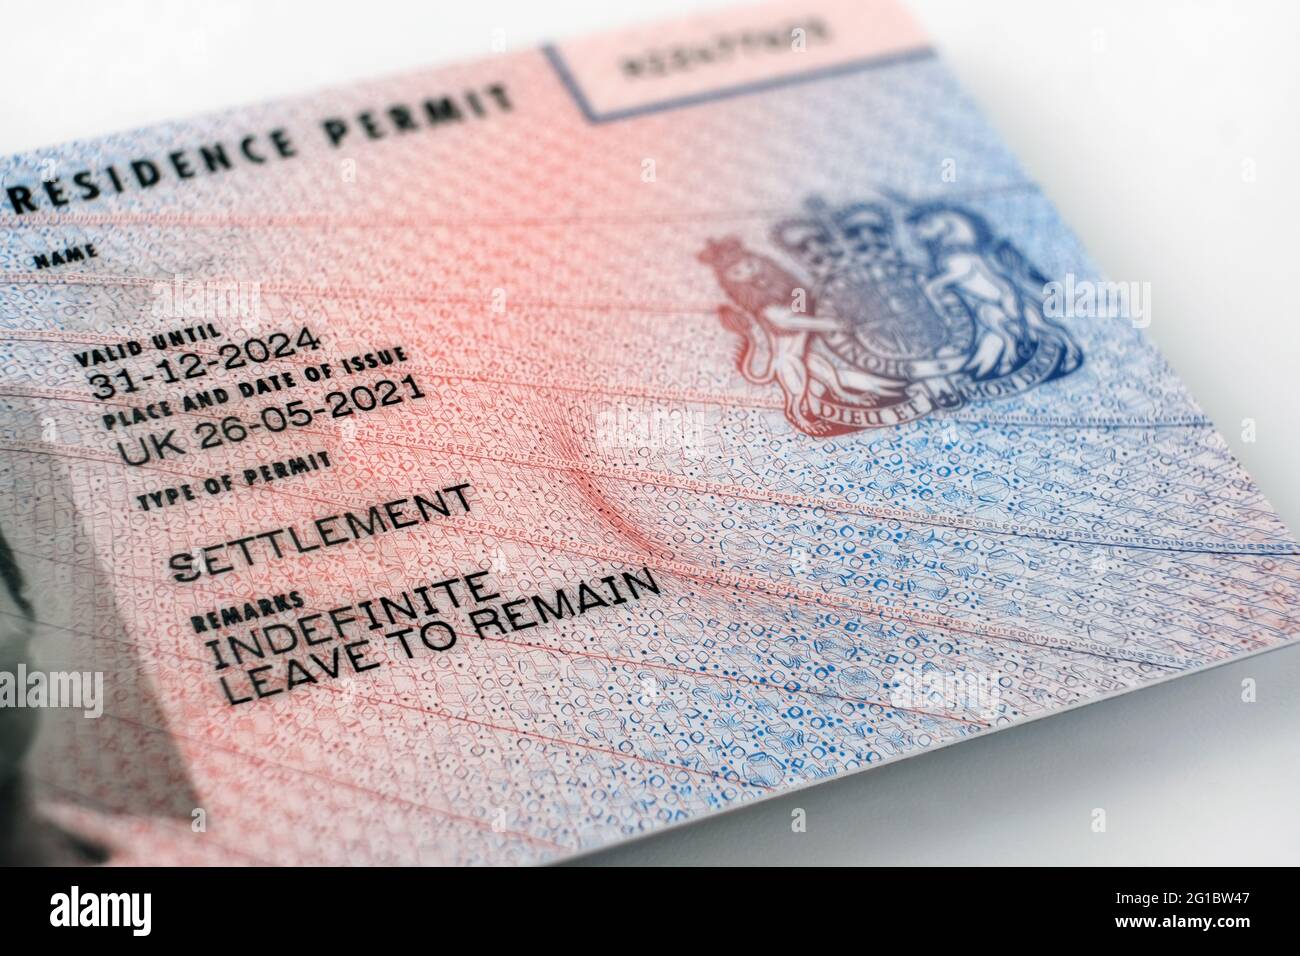 Uk residence card hi-res stock photography and images - Alamy